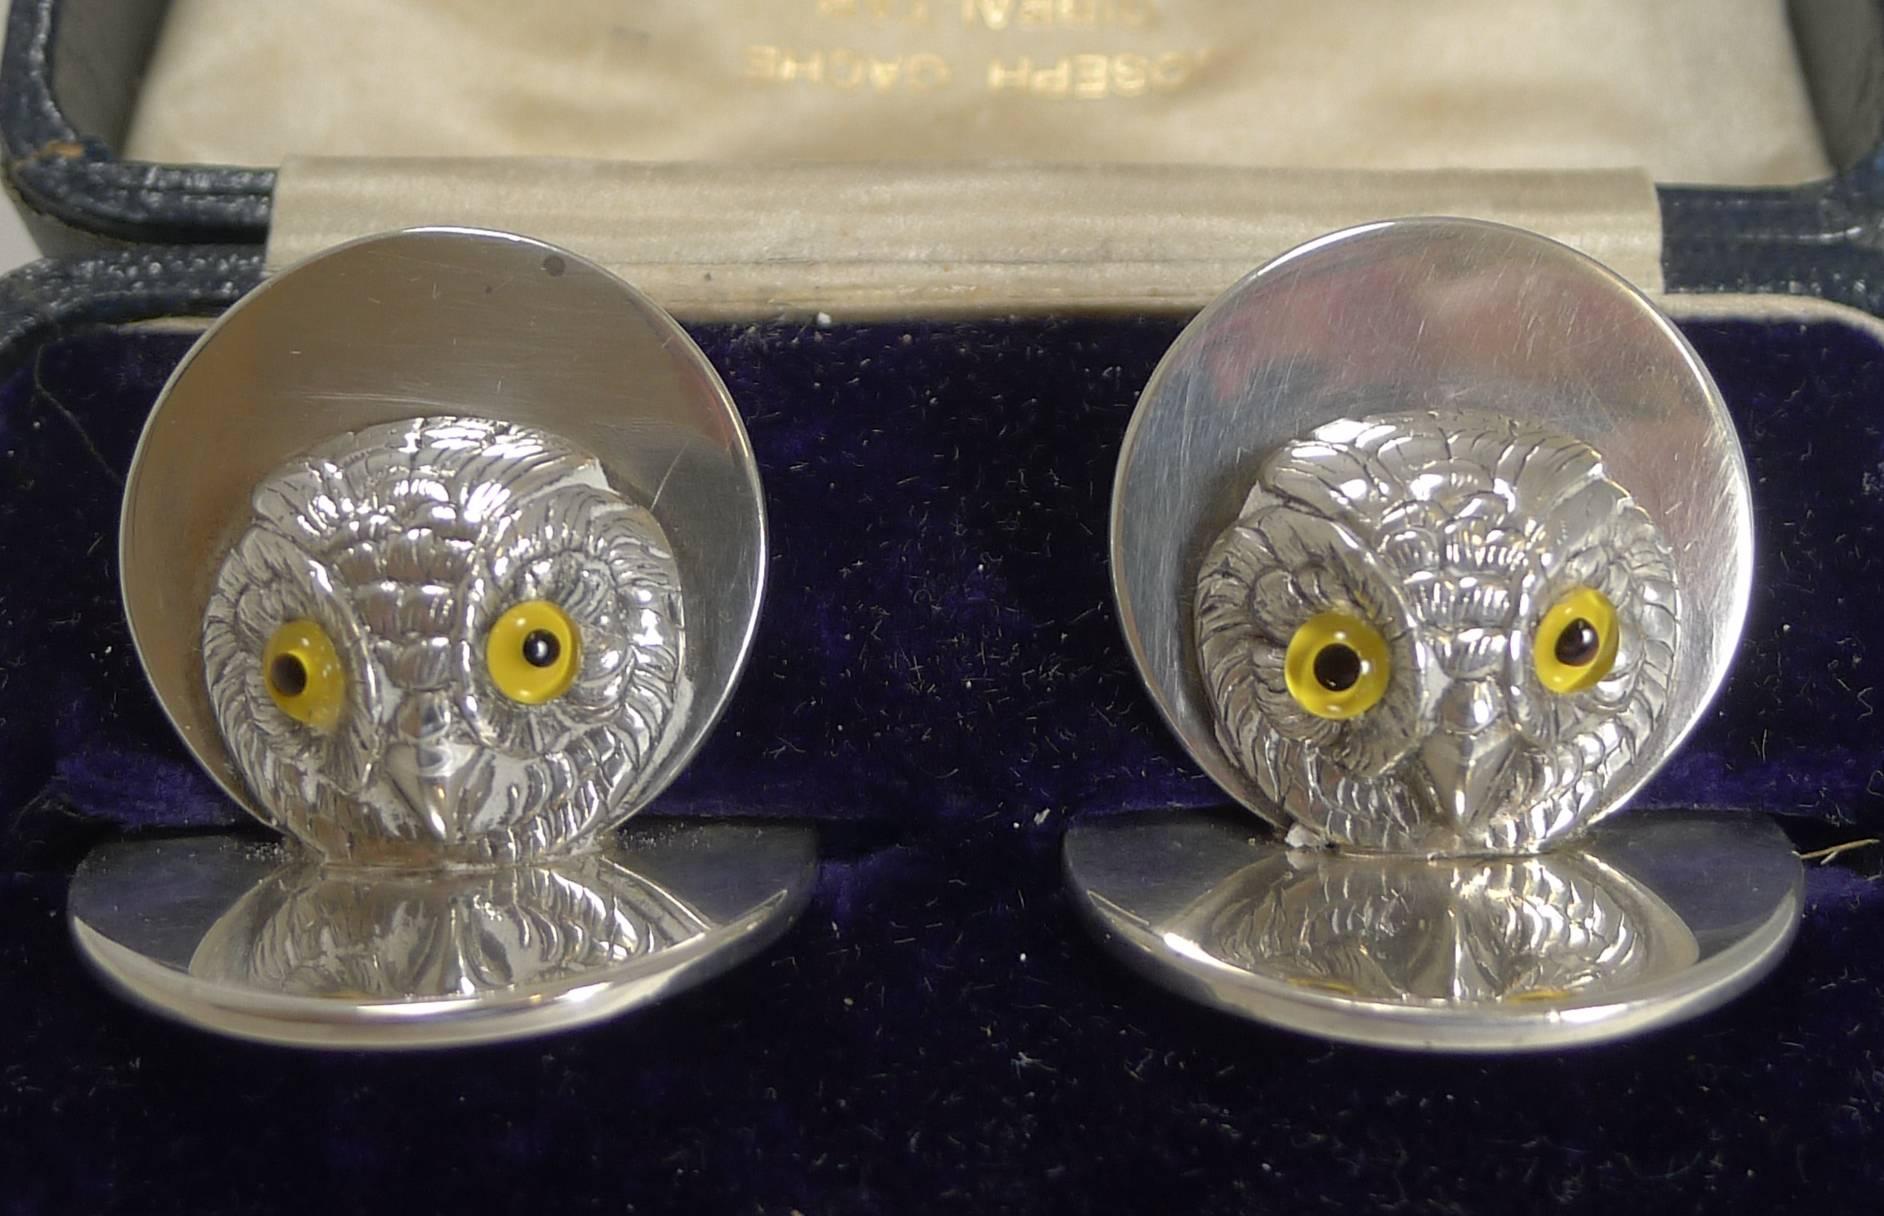 A stunning pair of antique English sterling silver menu holders by the highly collectable silversmith, Sampson Mordan & Co. Each is fully hallmarked for Chester 1911.

The front of each features a finely executed Owl's head retaining the original